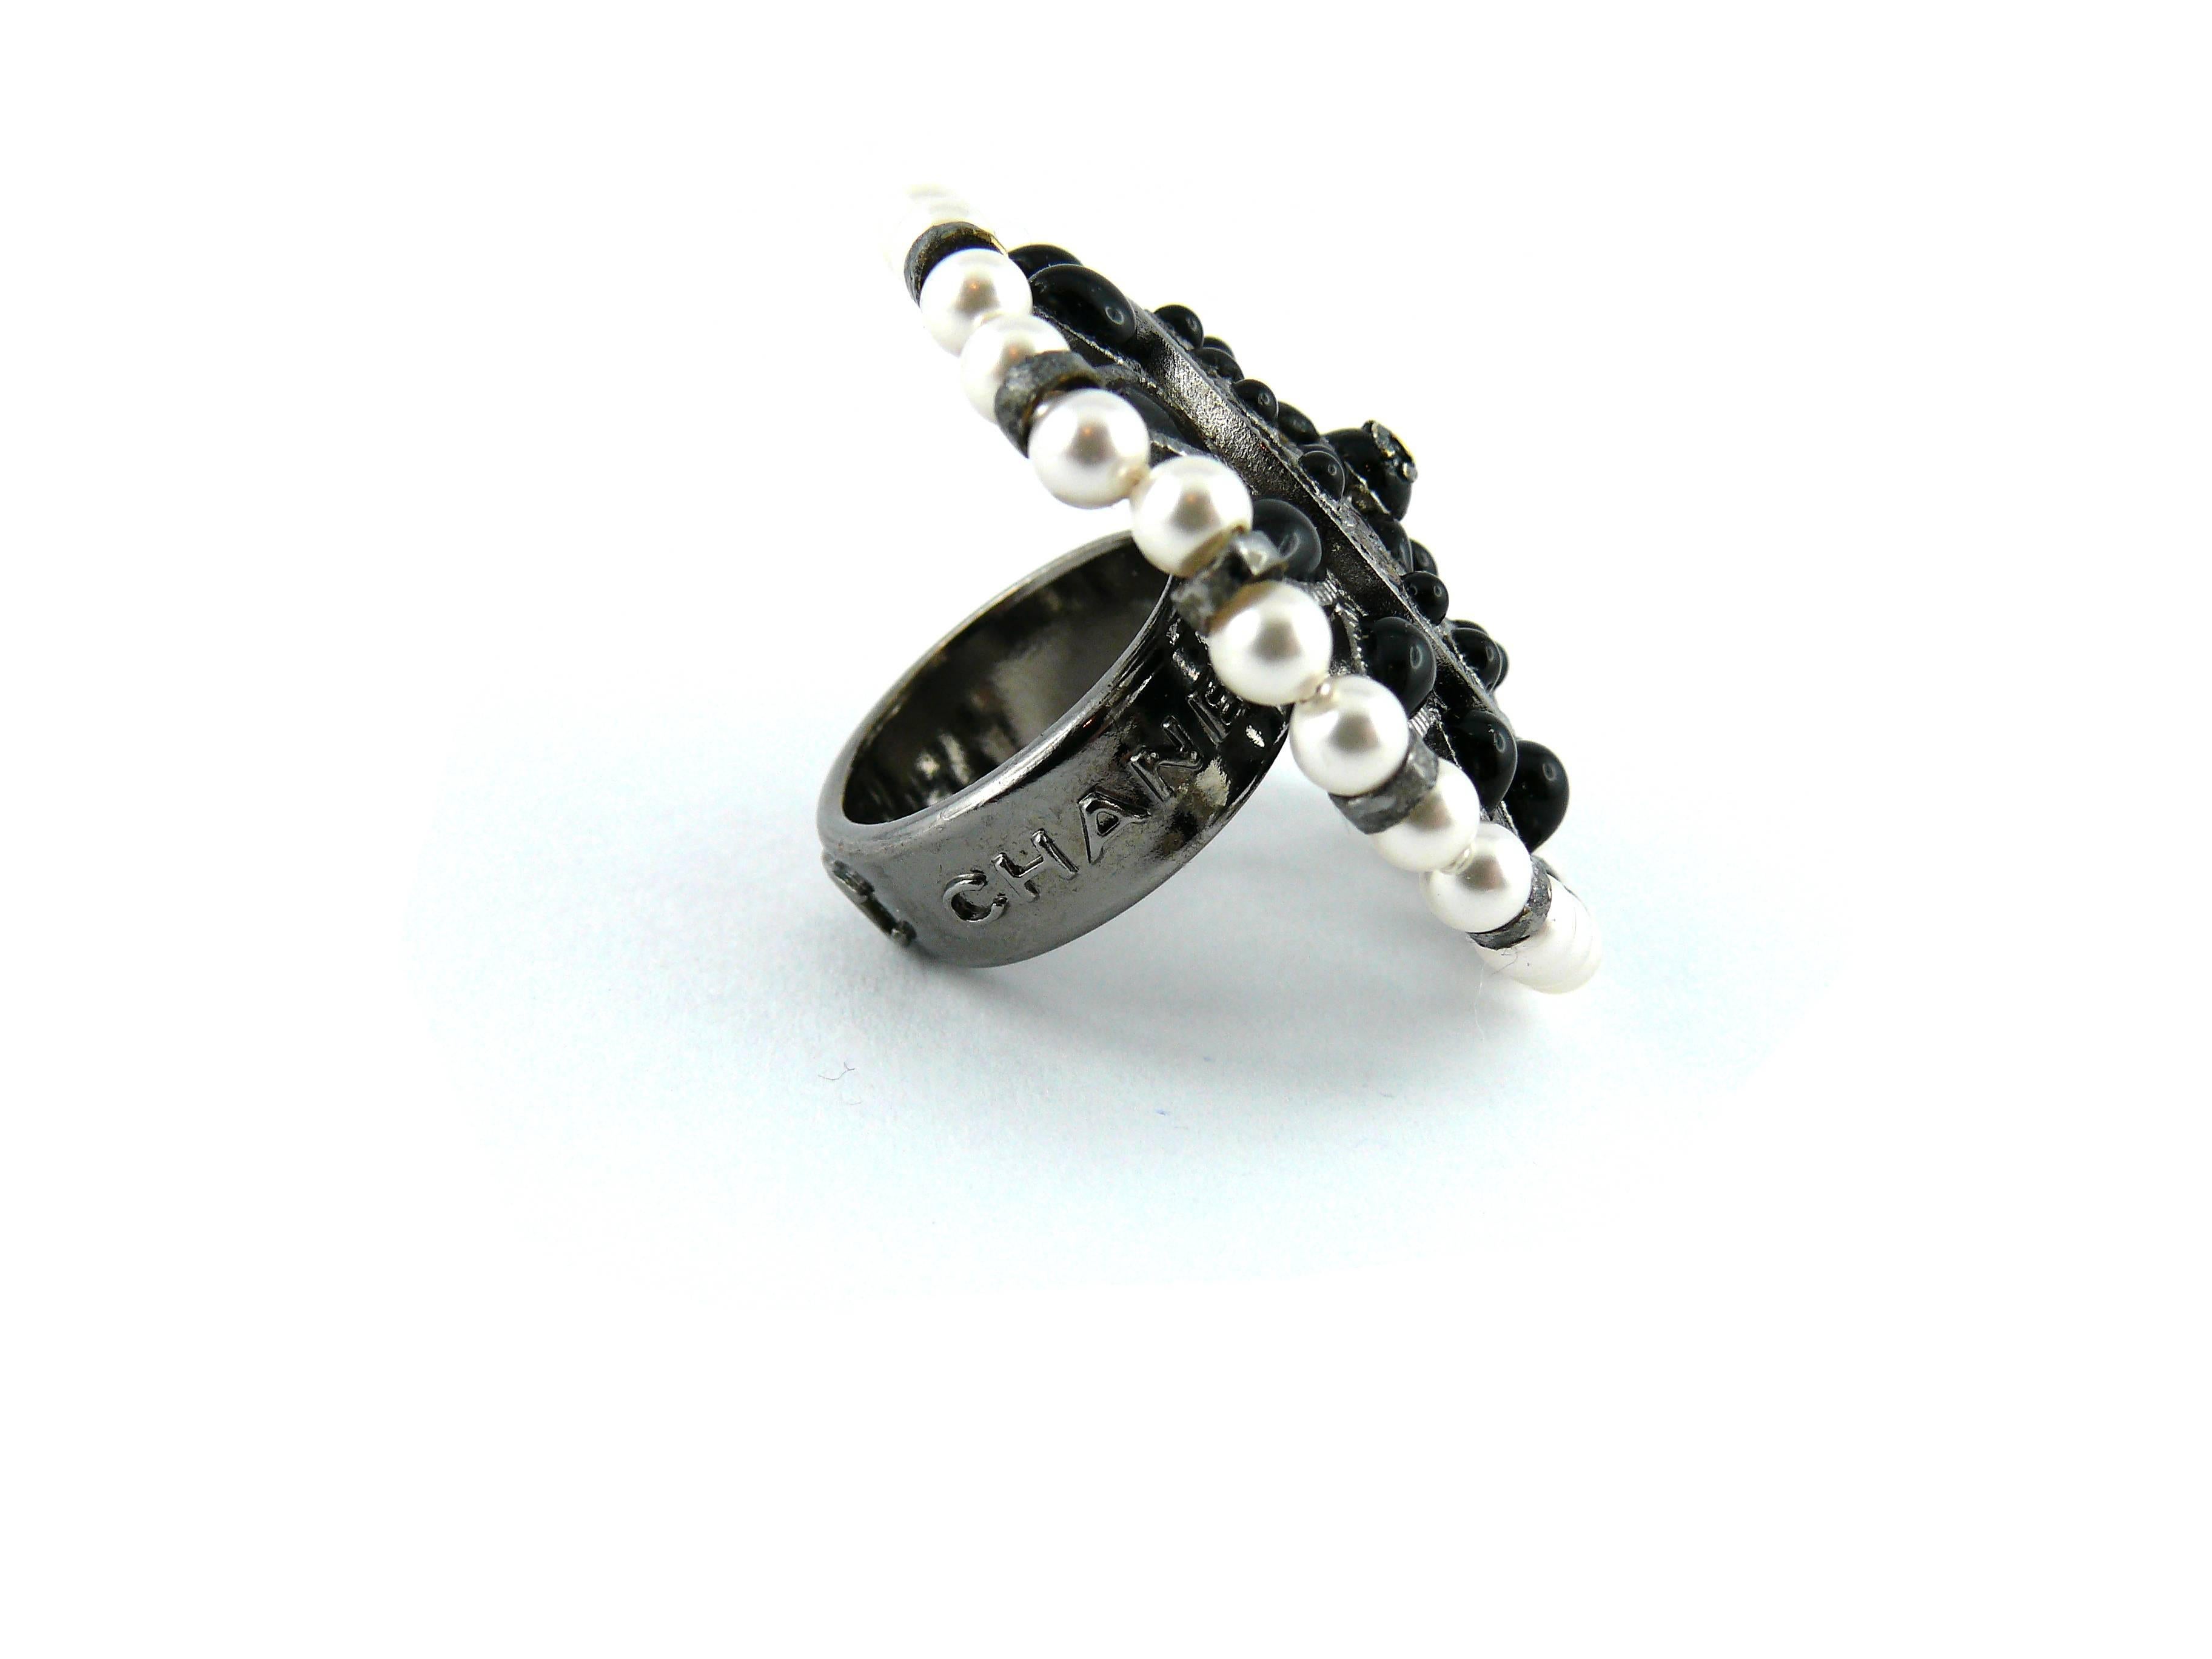 CHANEL massive black and white couture flower ring made of faux pearls and poured glass cabochons in a silver tone openwork setting.  Adorned with CC logo on the central cabochon.

Embossed Chanel Paris.

Size : US 6 3/4 - FR 54. 
Diameter of